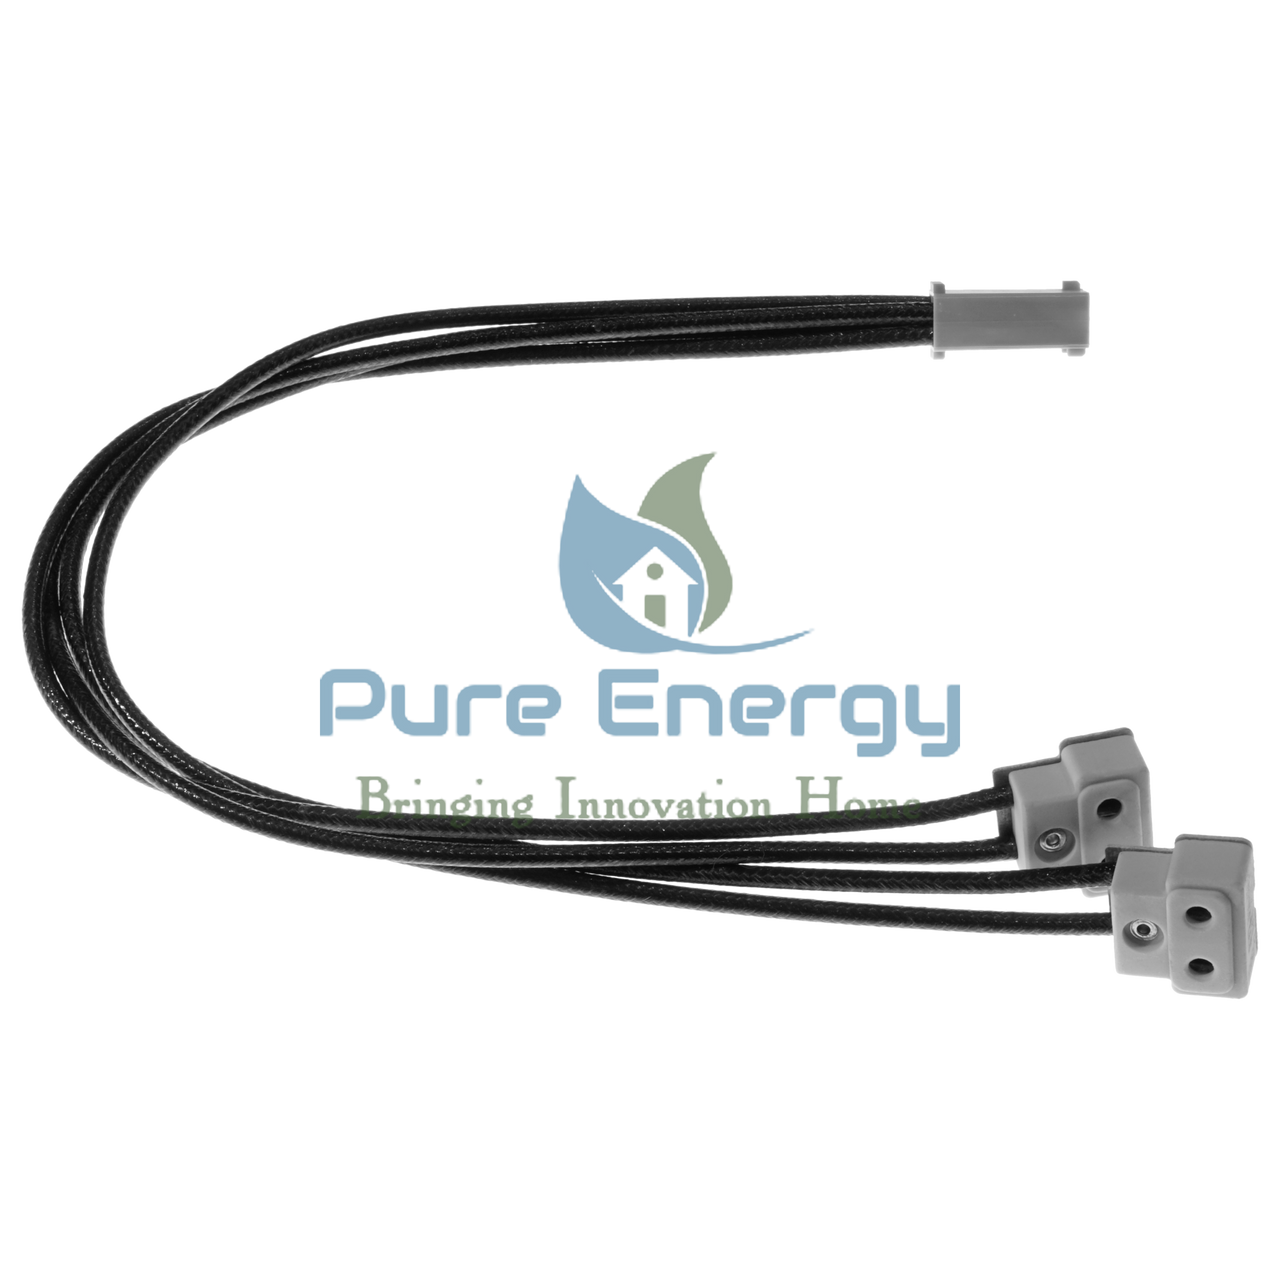 Complete EdenPURE US 001 GEN 4 and US 1000 Bulb Connector Cables